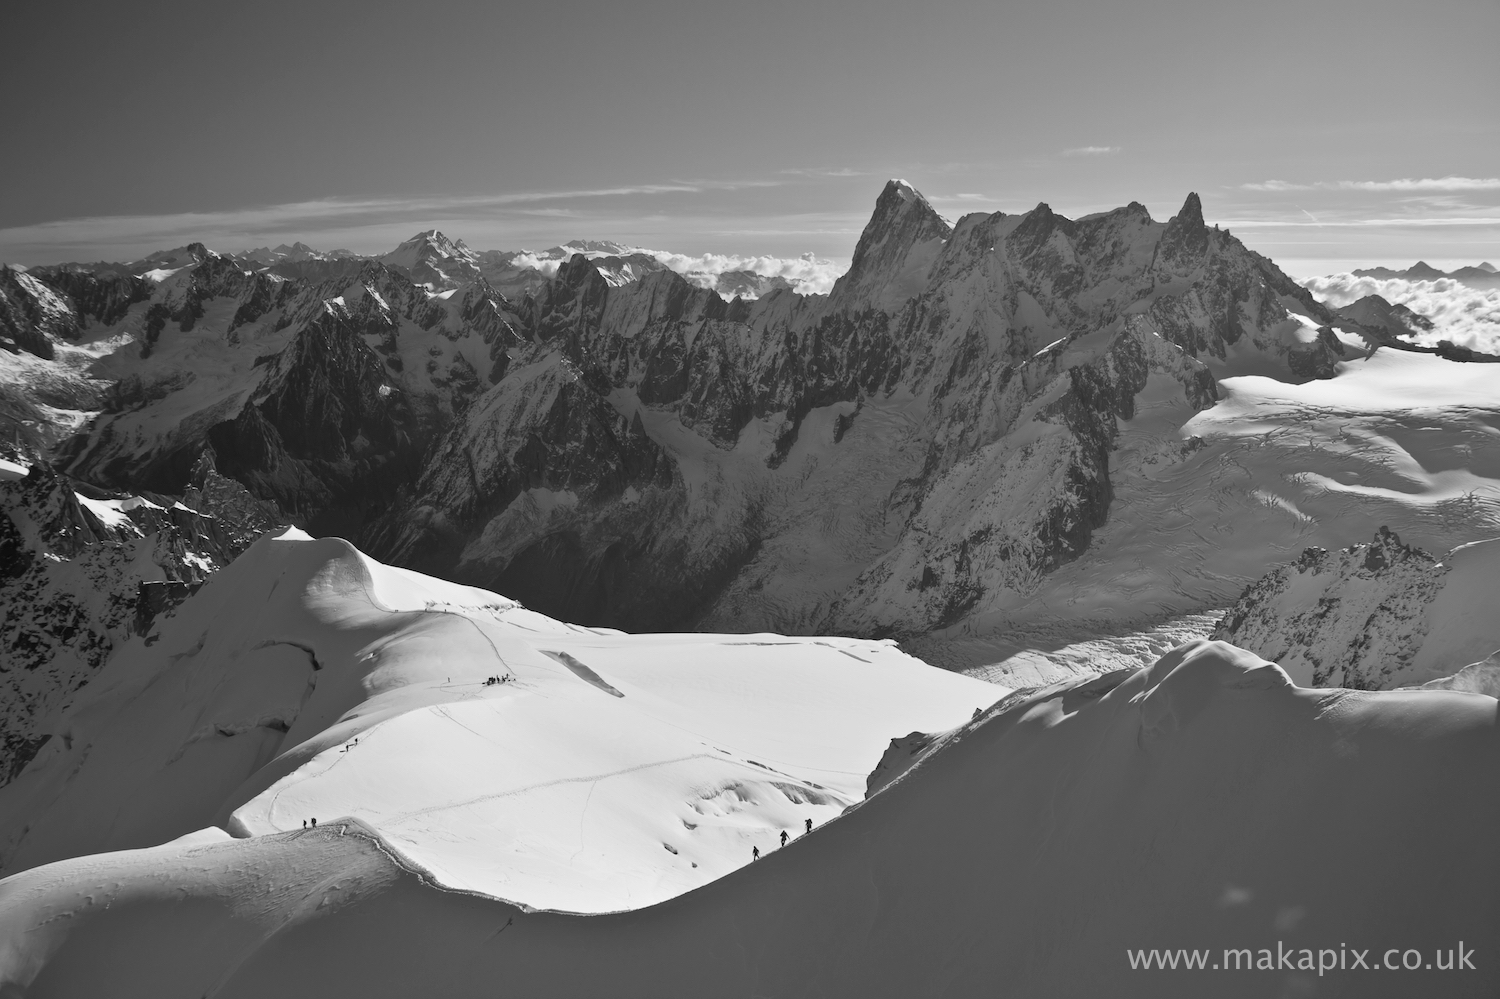 The Alps in b&w